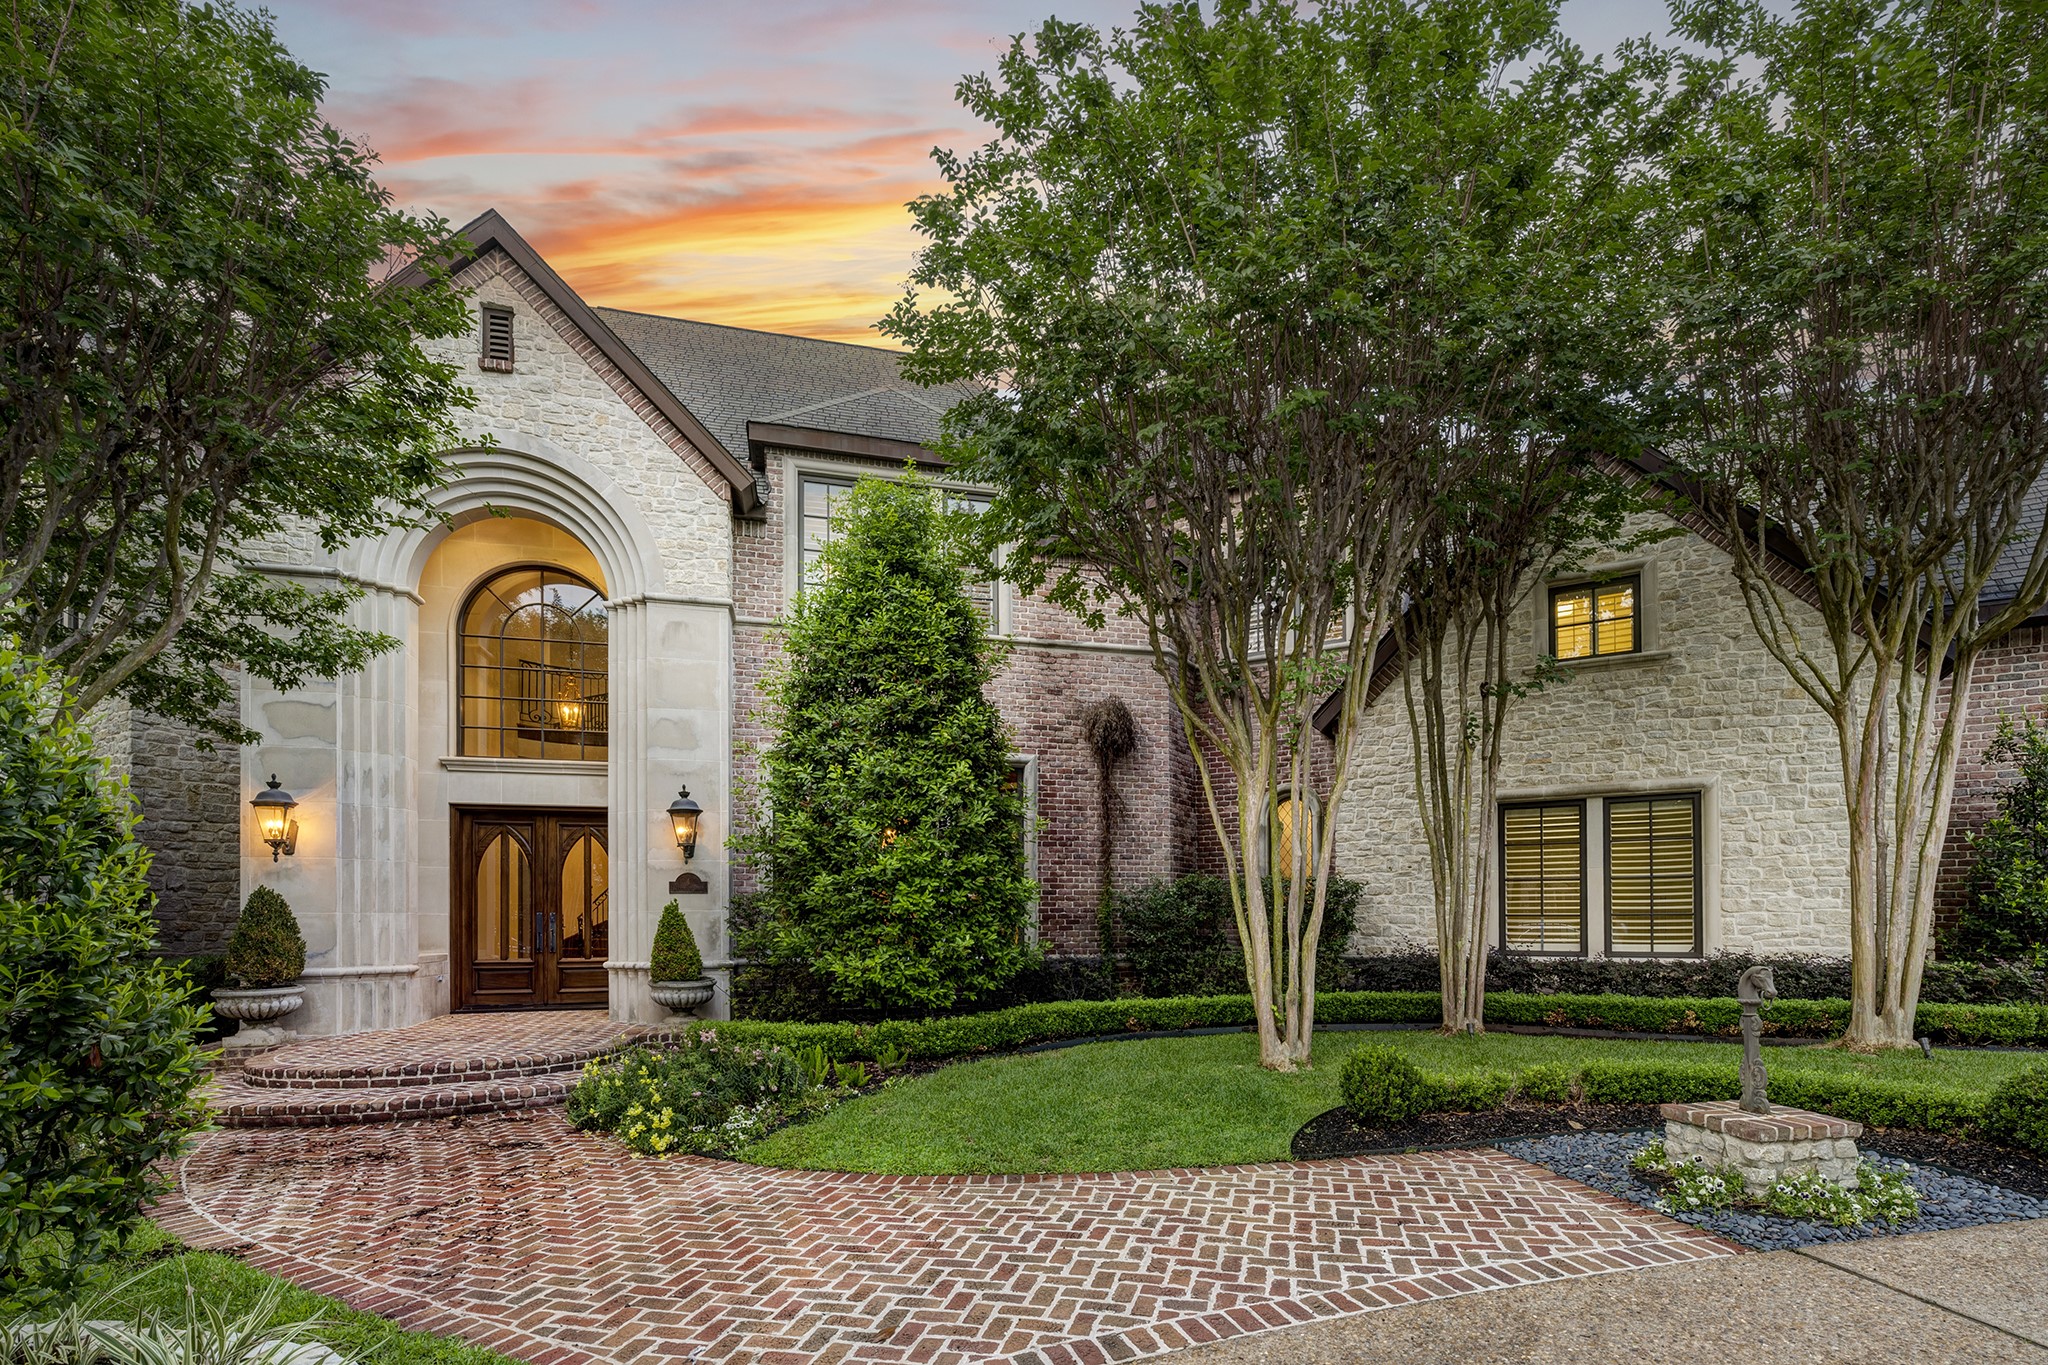 Stunning Crestwood Acres home custom-built by Peter Serebrenik and designed by Preston Wood. Gracious formals, beautiful millworks and finishes nestled in a secluded yet centrally located location near Memorial Park.